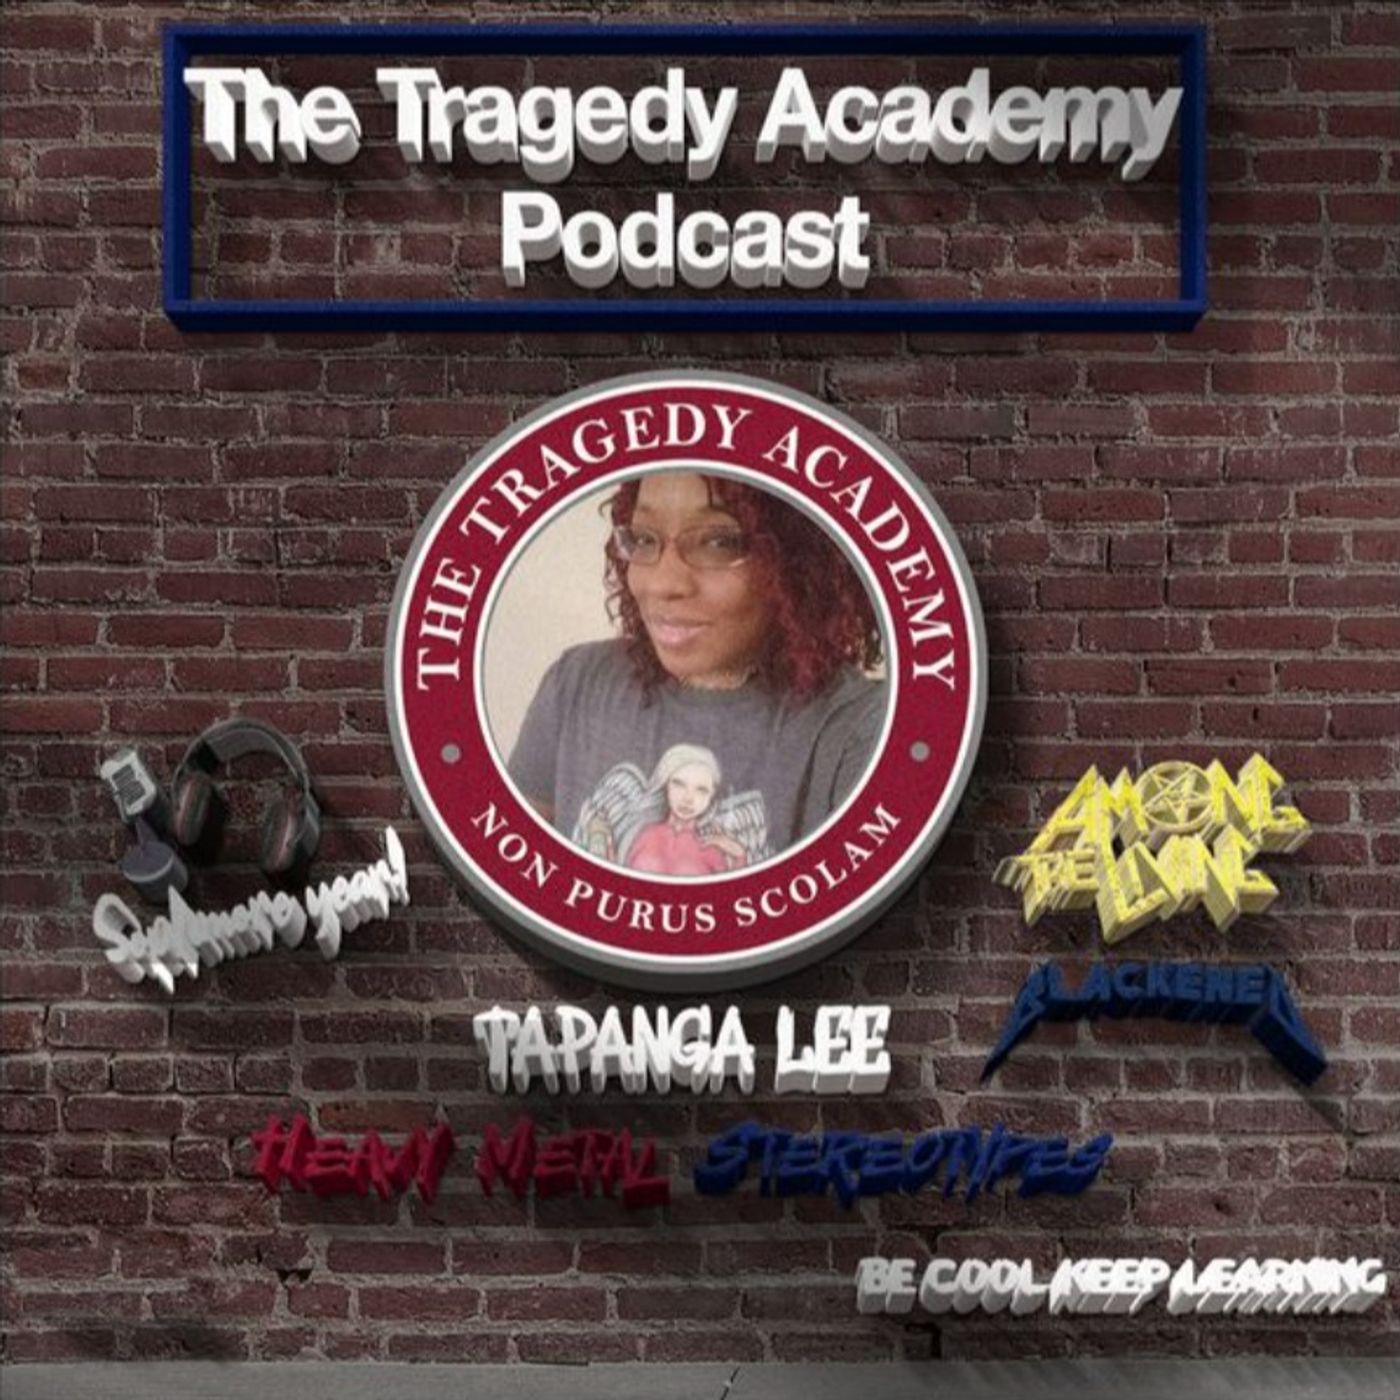 Artwork for podcast The Tragedy Academy